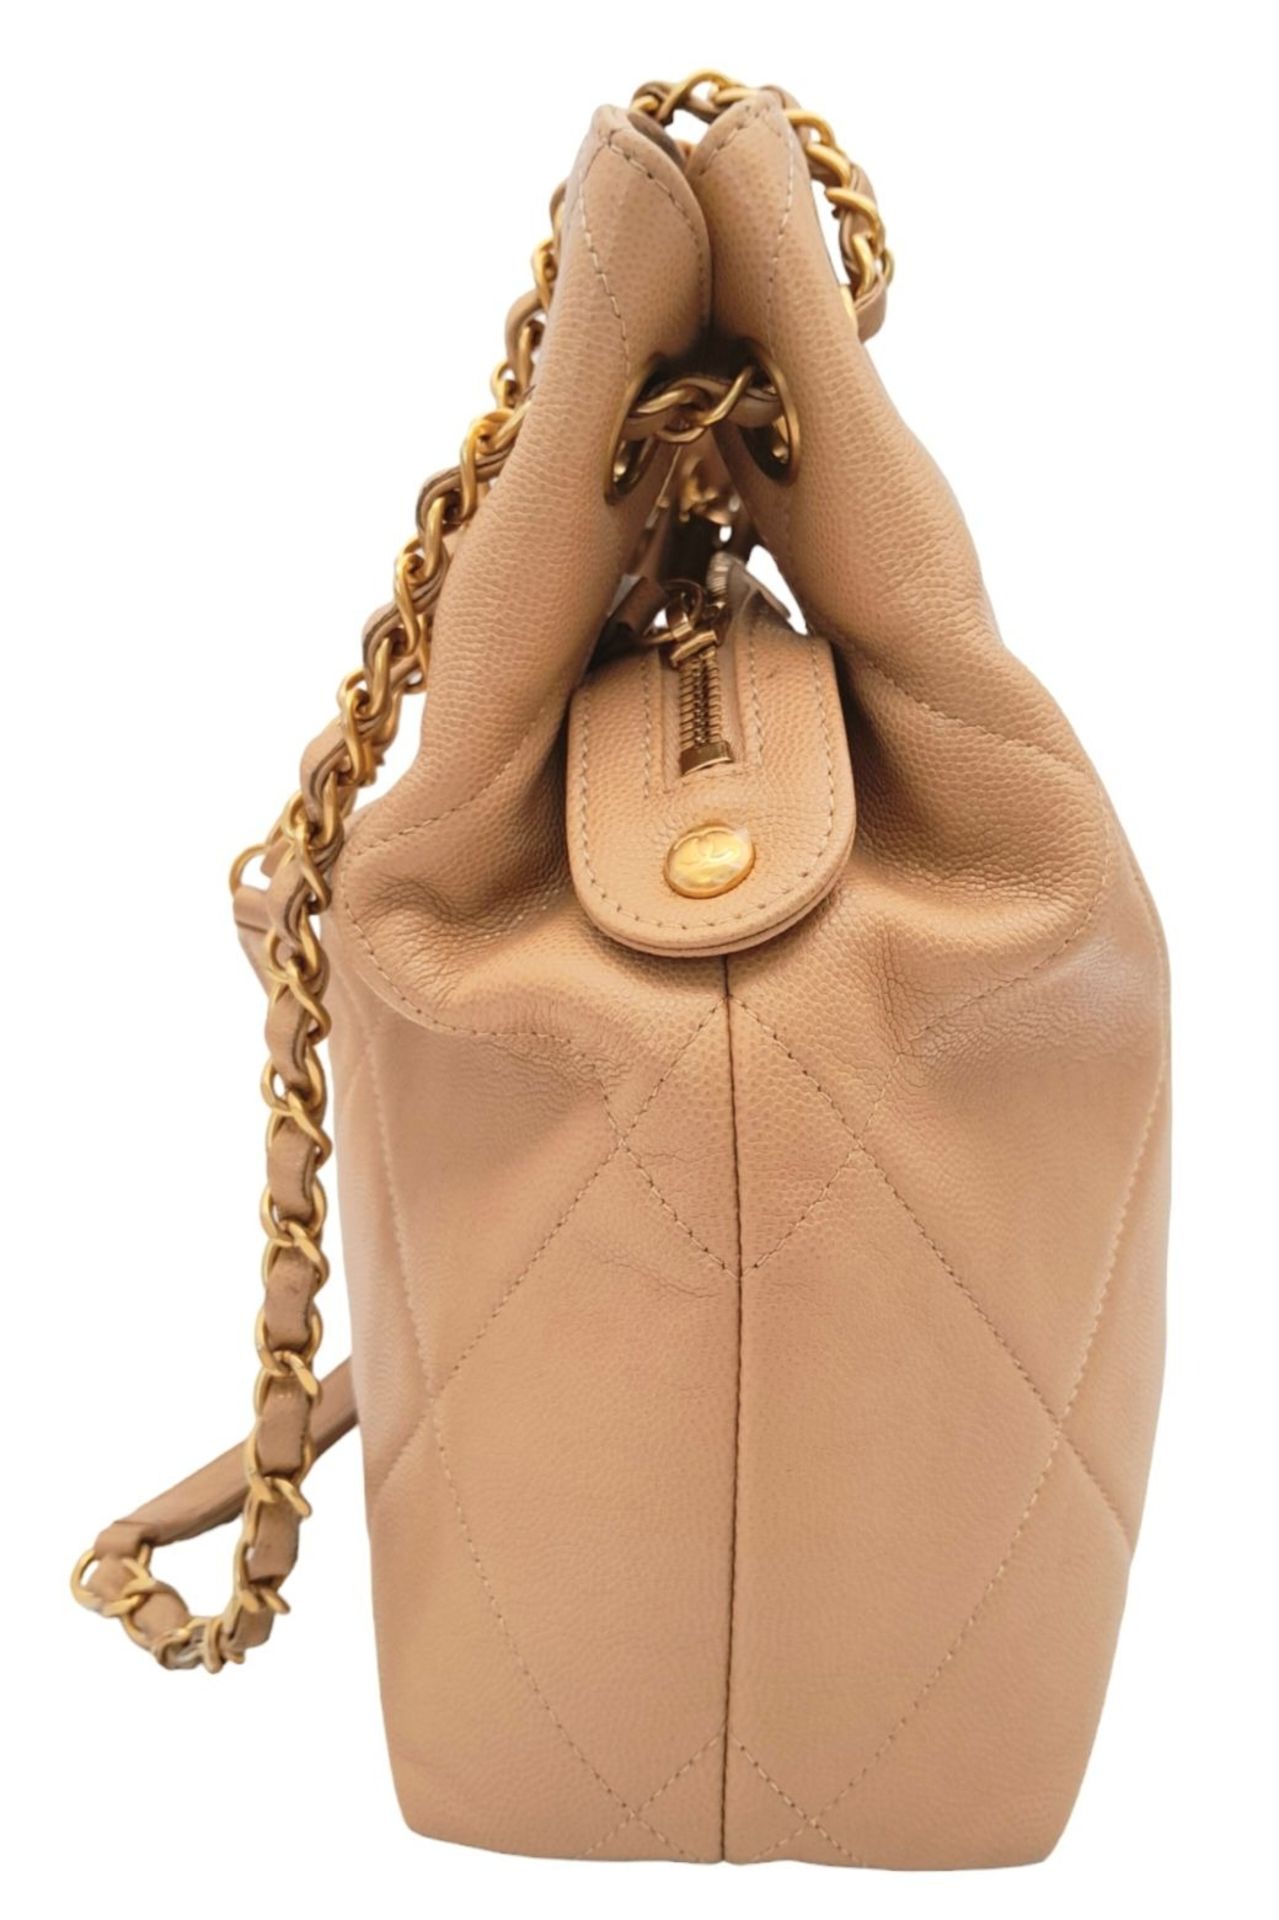 A Chanel Two-Way Chain Shoulder Bag. Beige caviar leather. Gold tone hardware. Spacious interior - Image 5 of 13